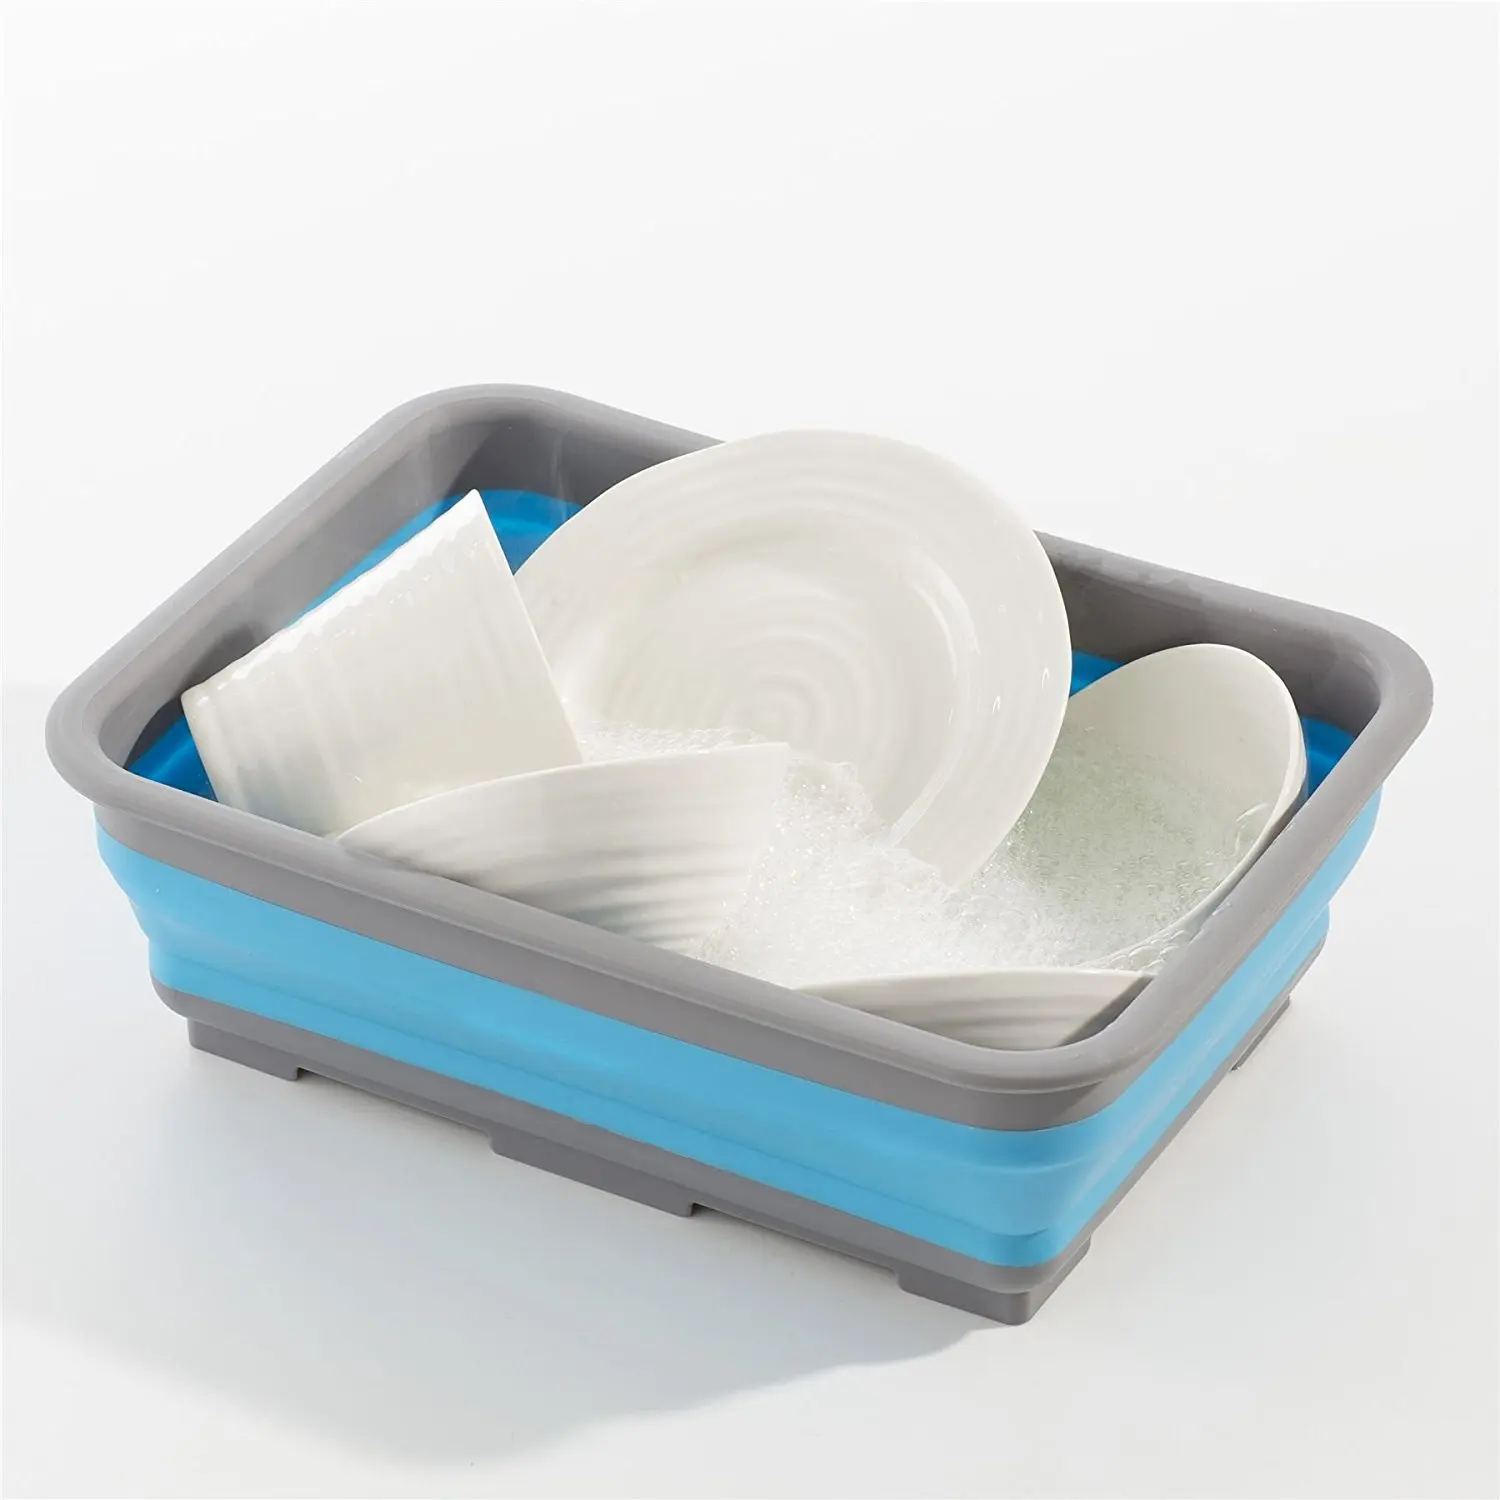 Rectangular Collapsible Foldable Washing up Dish Drainer Reusable Silicone Bowl 